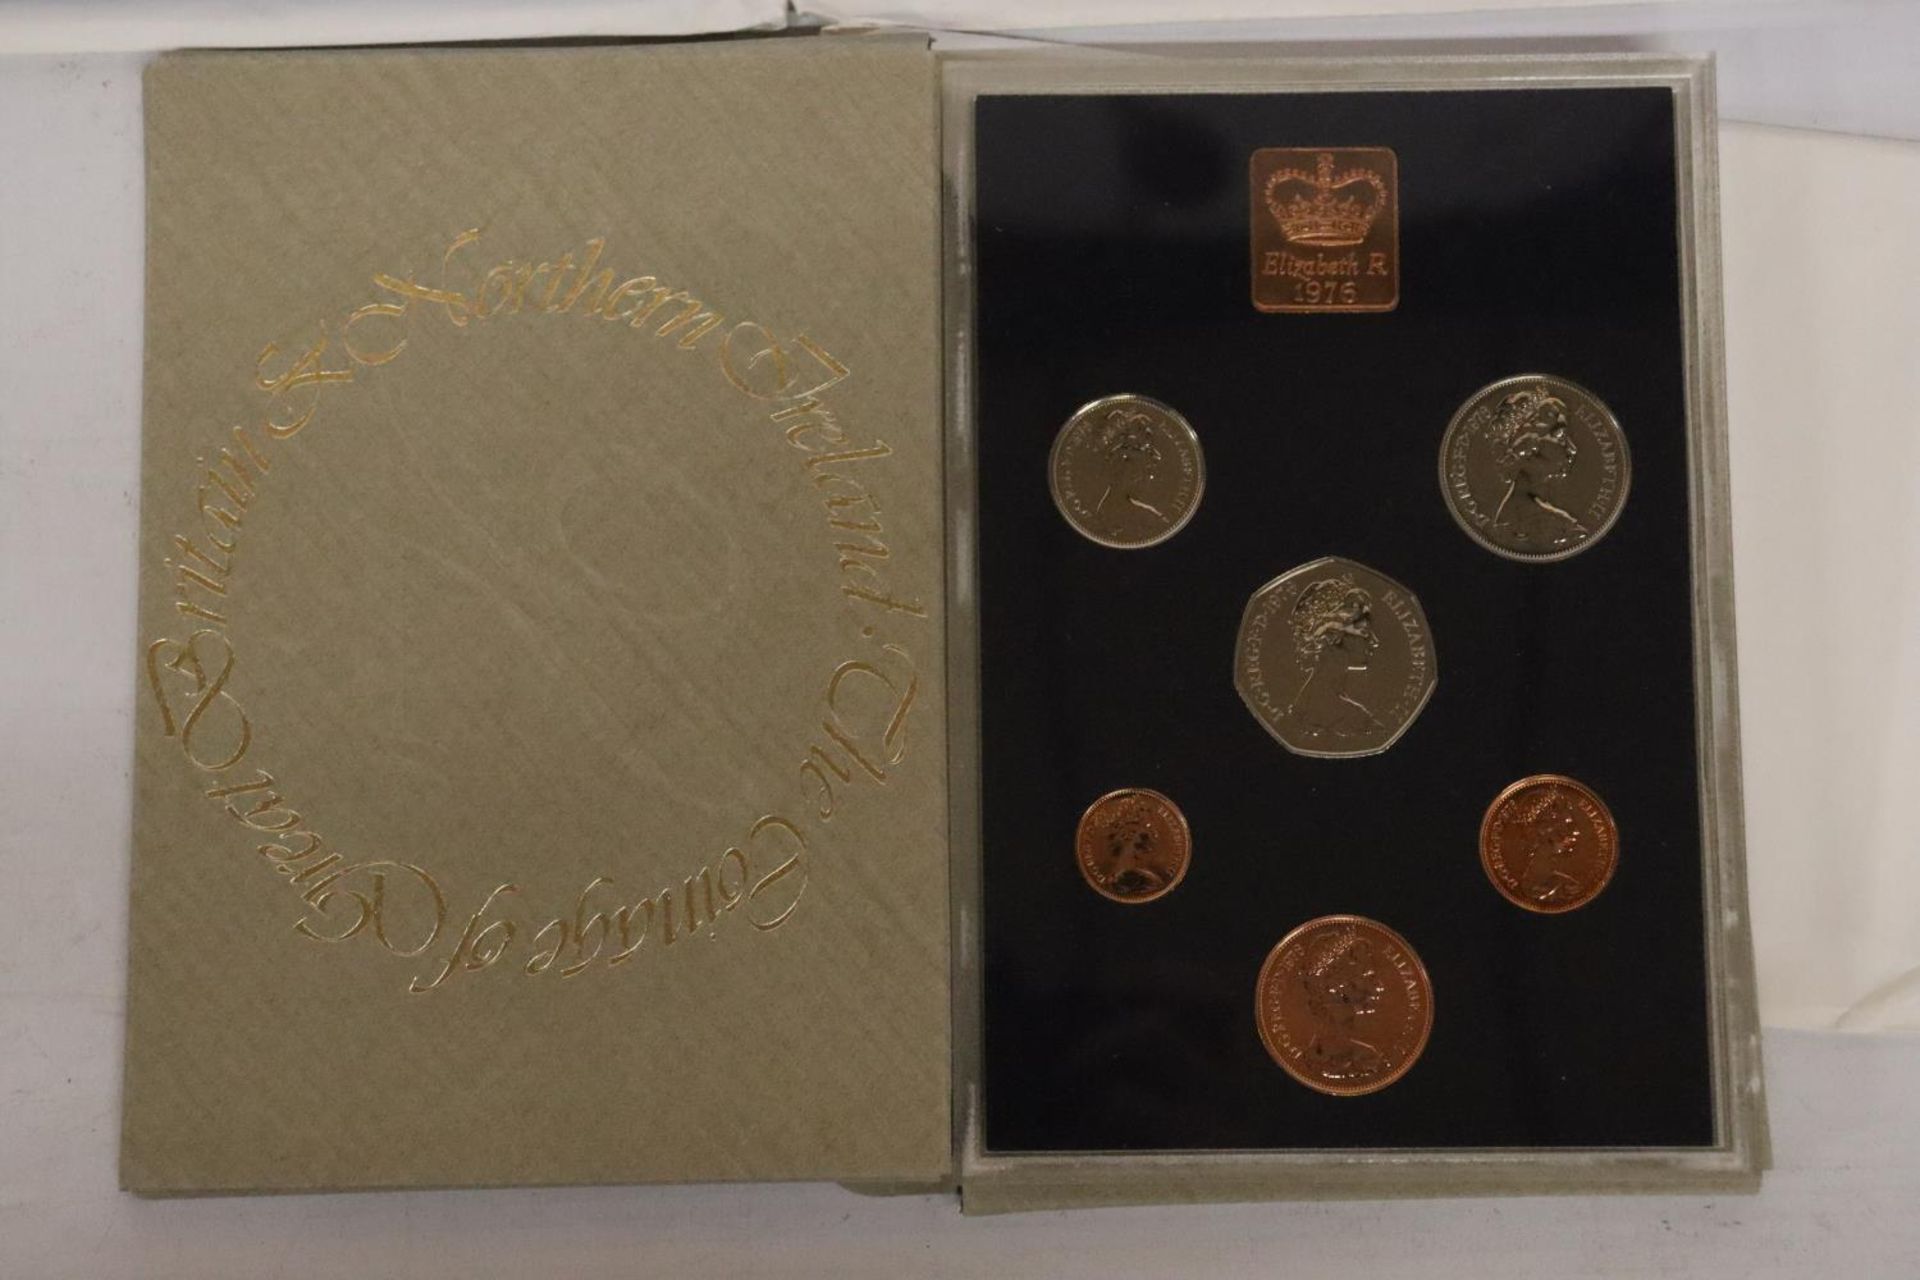 UK & NI 2 X ’76, 2 X ’77 AND 2 X ’78 YEAR PACKS OF COINS CONTAINED IN ENVELOPE - Image 2 of 4